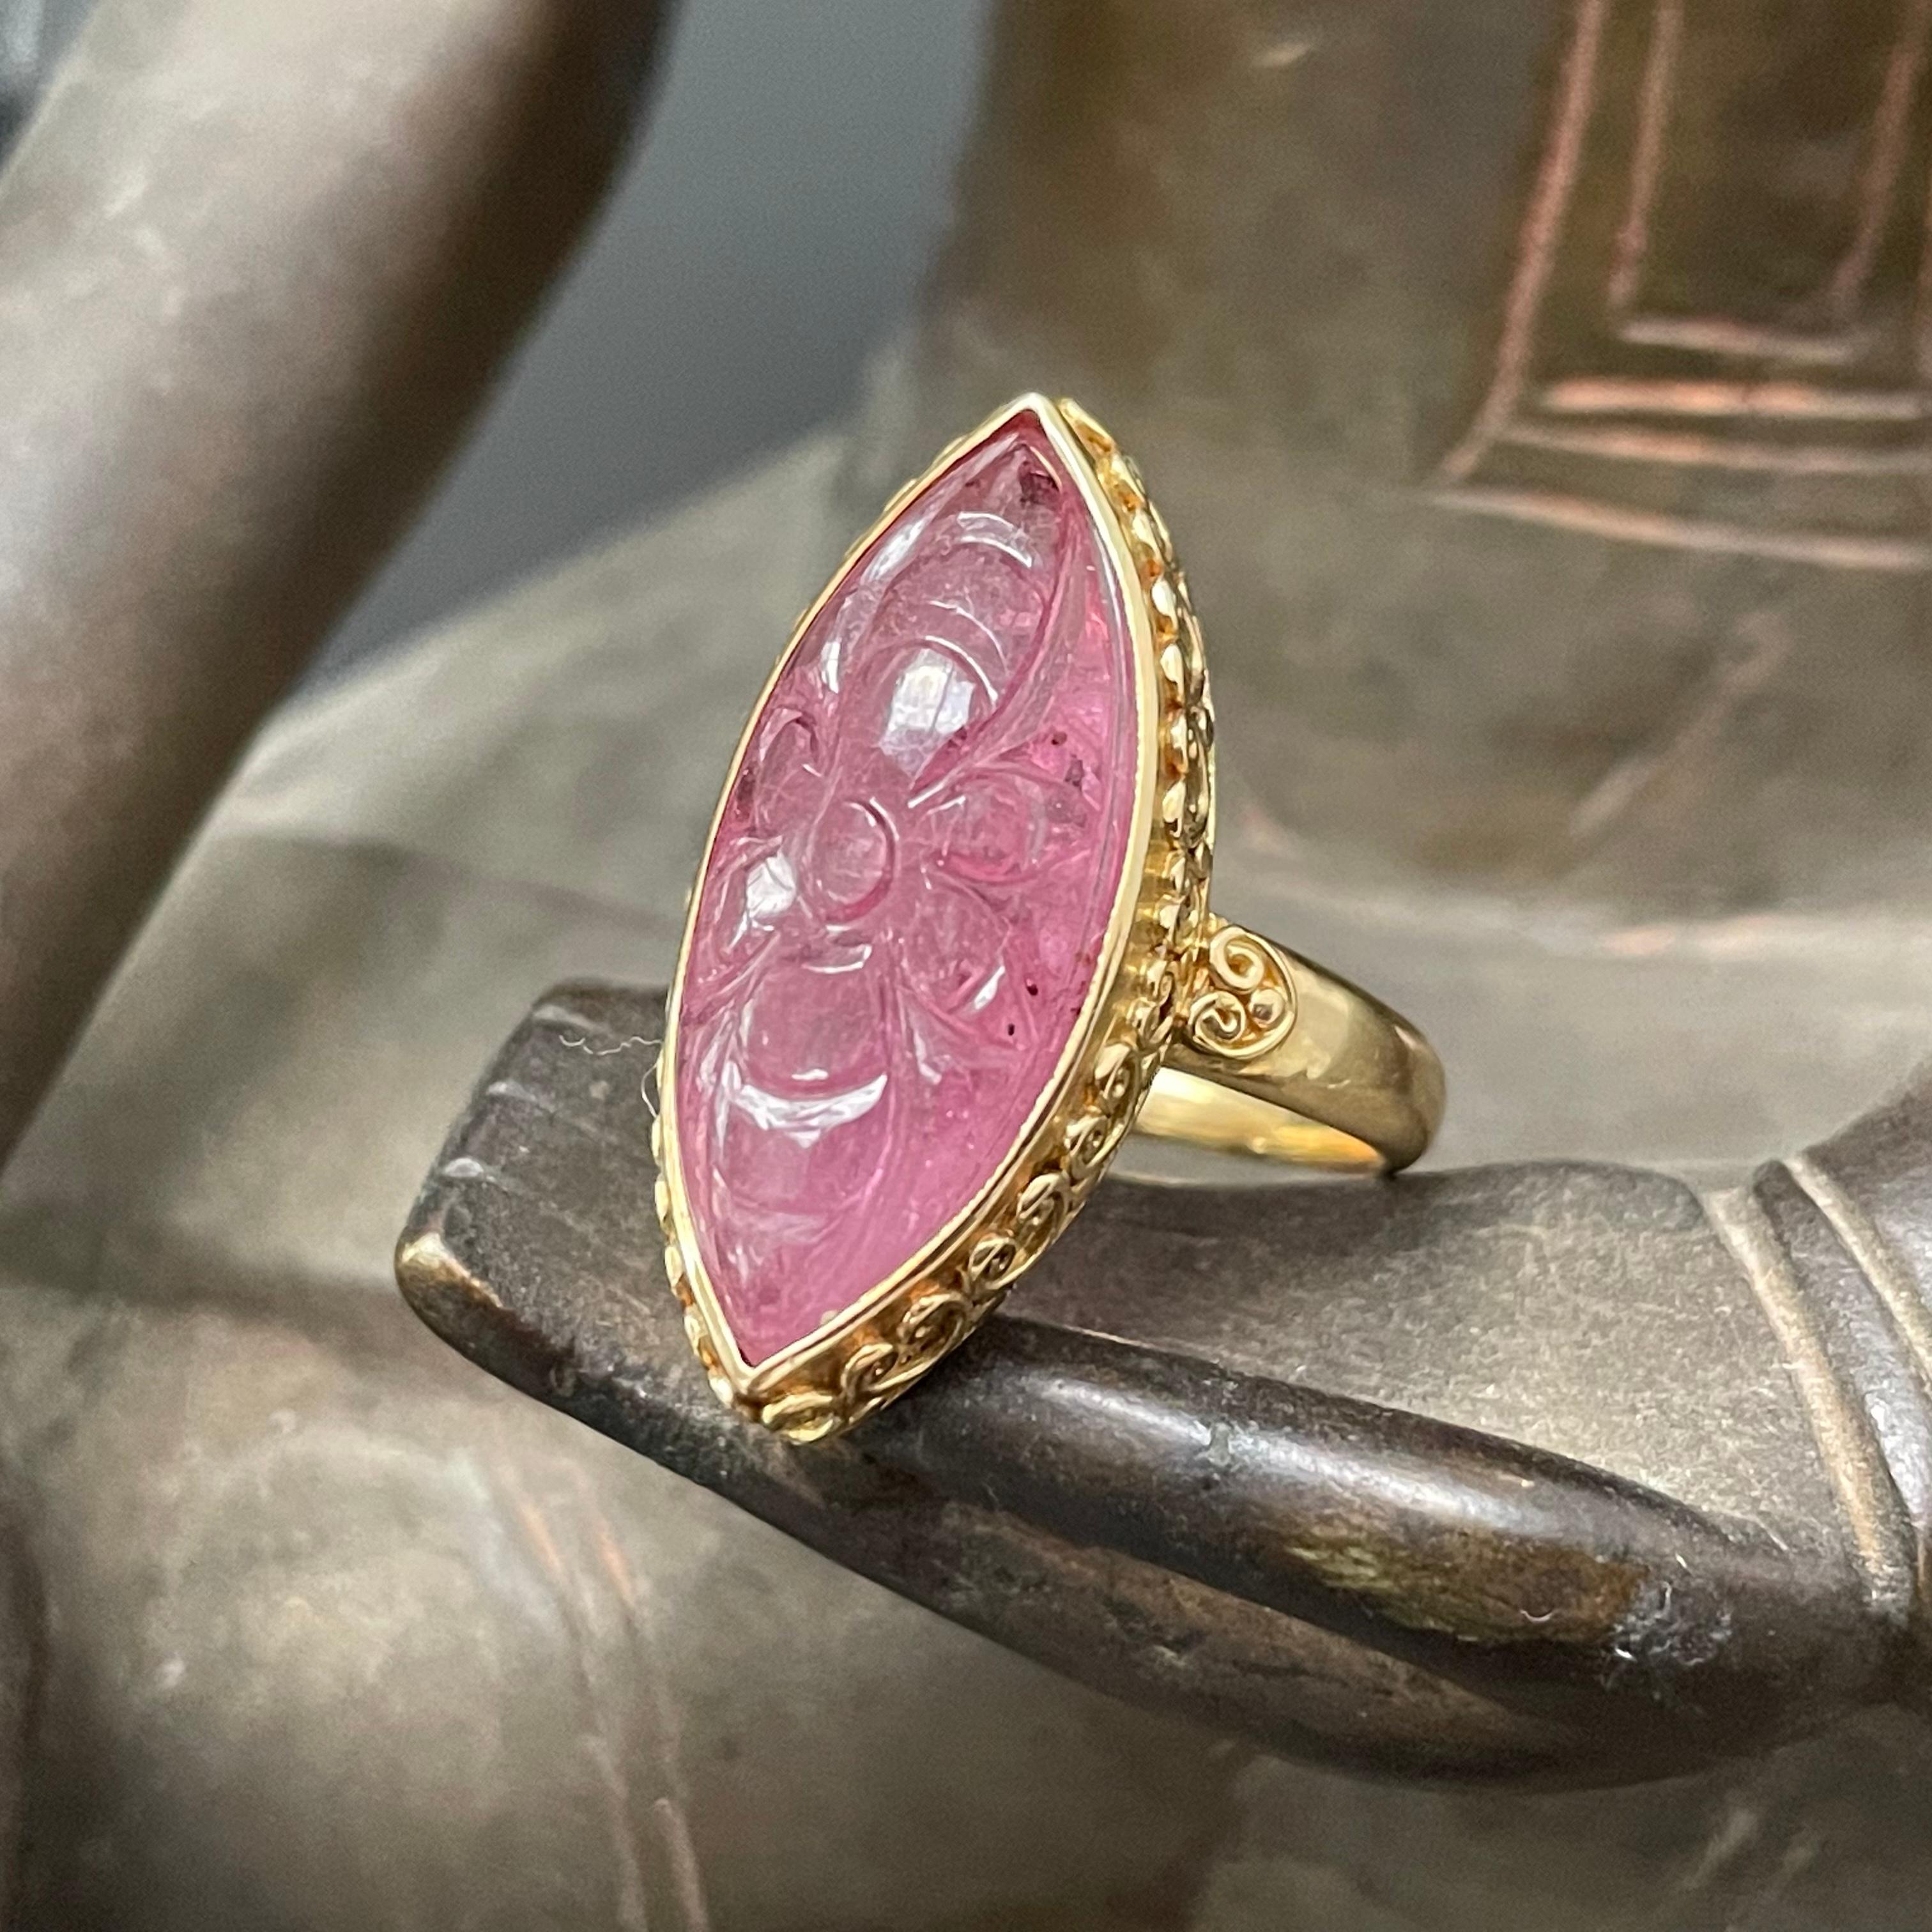 A 10 x 22 mm marquis shaped flower carved pink ruby cabochon is held in a handmade 18K gold 